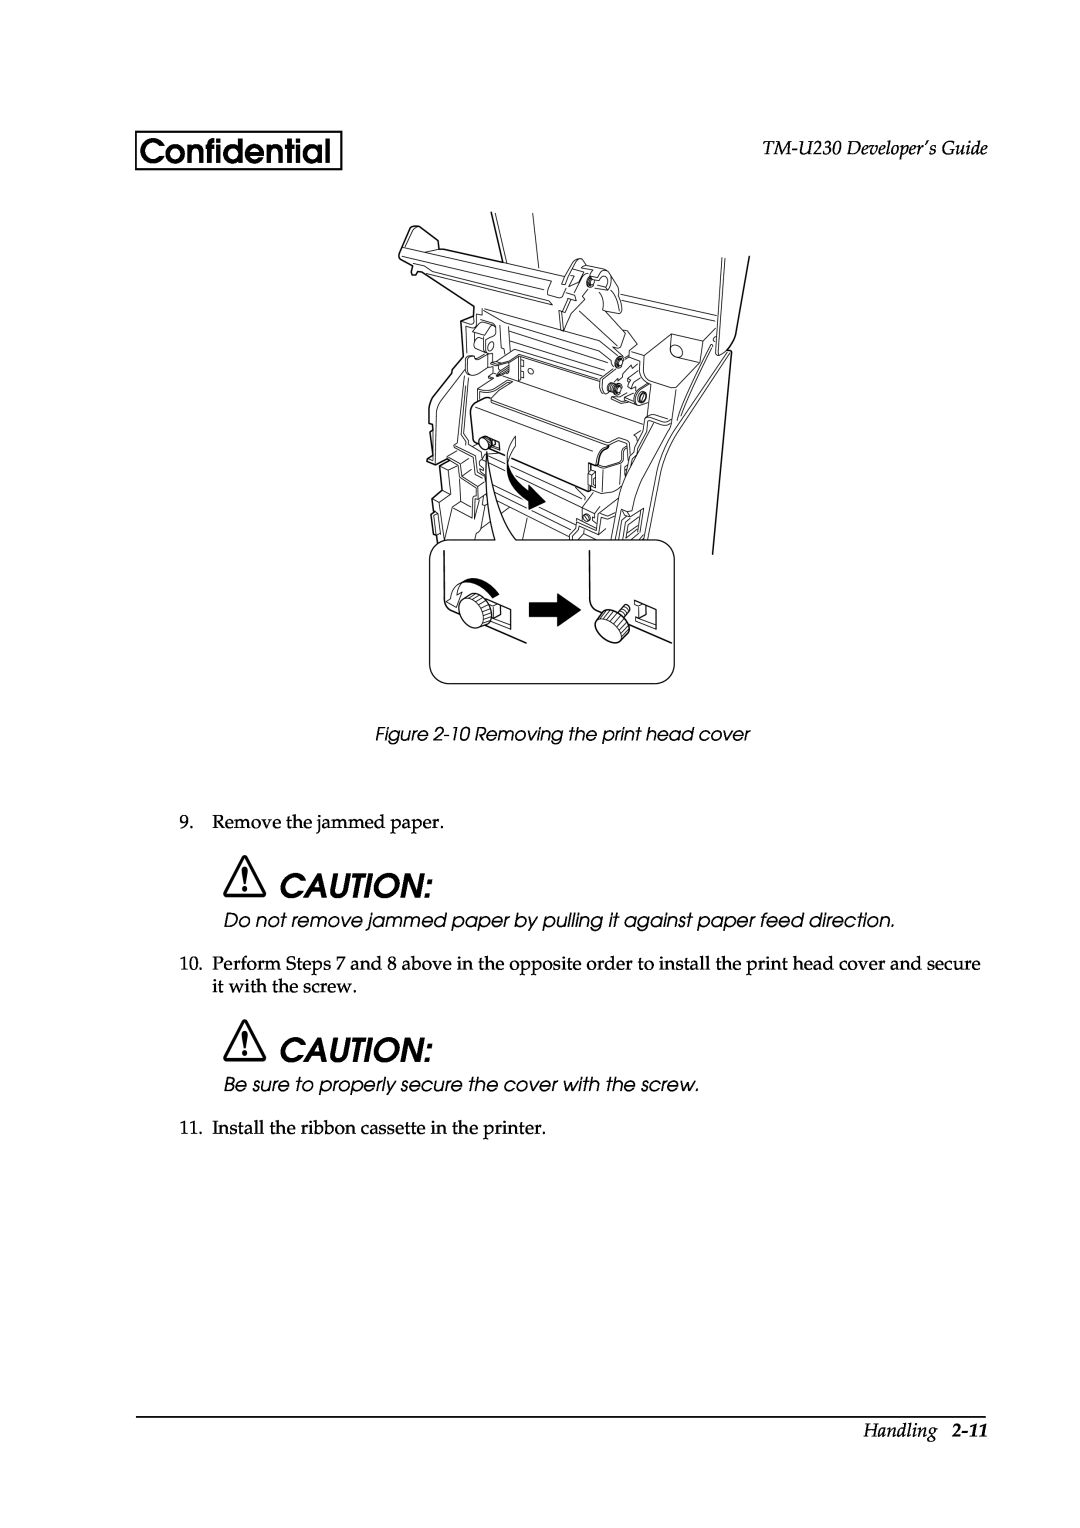 Epson manual Be sure to properly secure the cover with the screw, Confidential, TM-U230 Developer’s Guide, Handling 